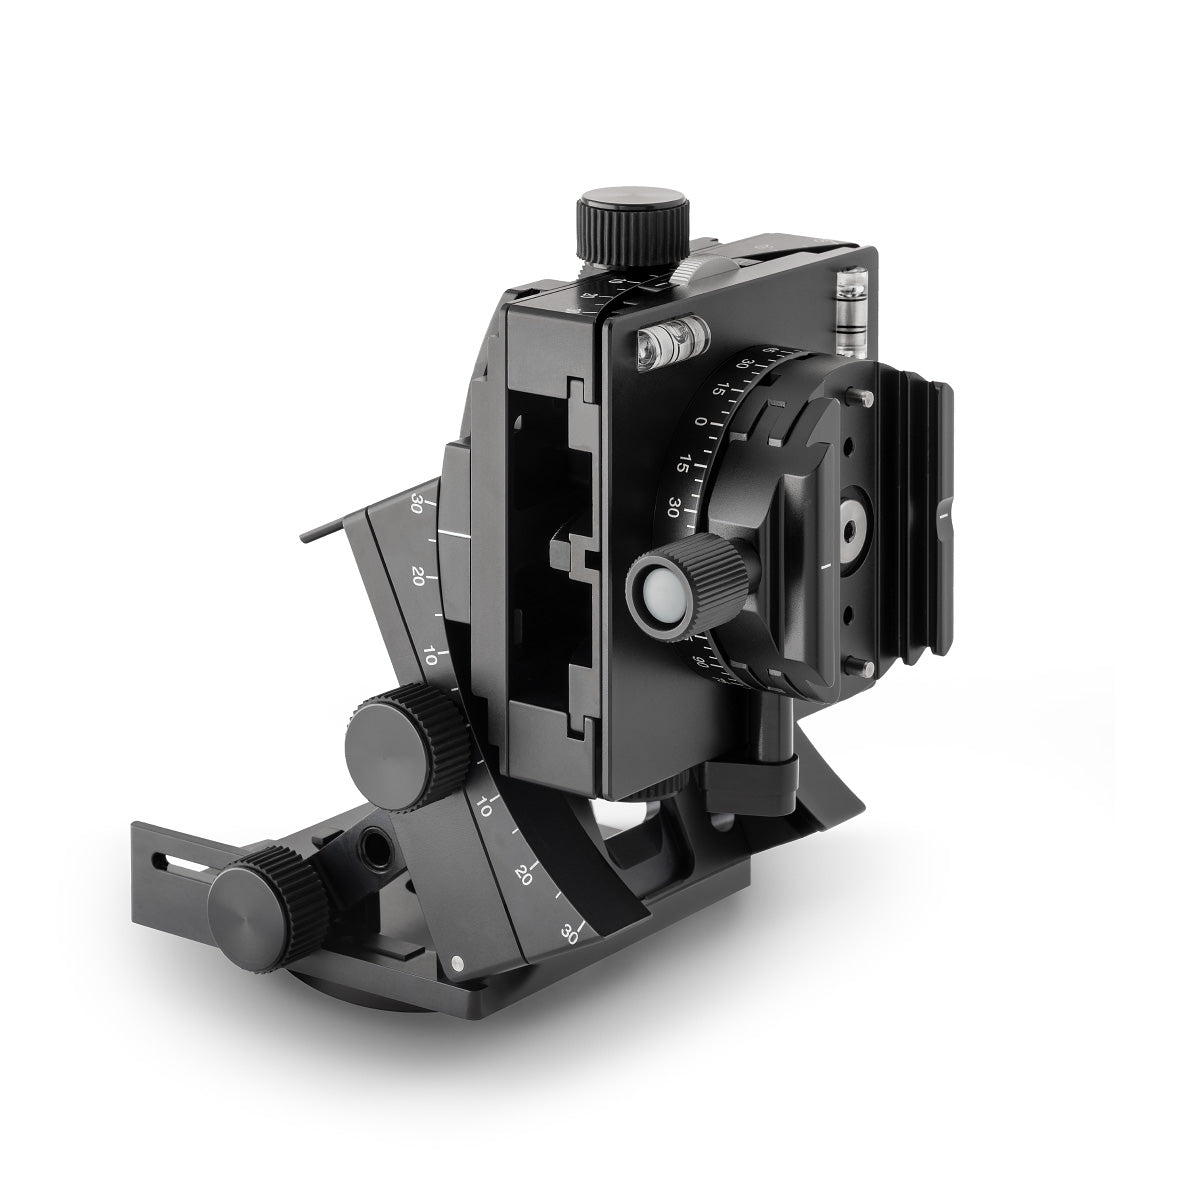 Arca-Swiss C1 Cube geared tripod head with Classic quick release, opened to the 90 degree vertical orientation position, 3/4 view, model 8501003.1